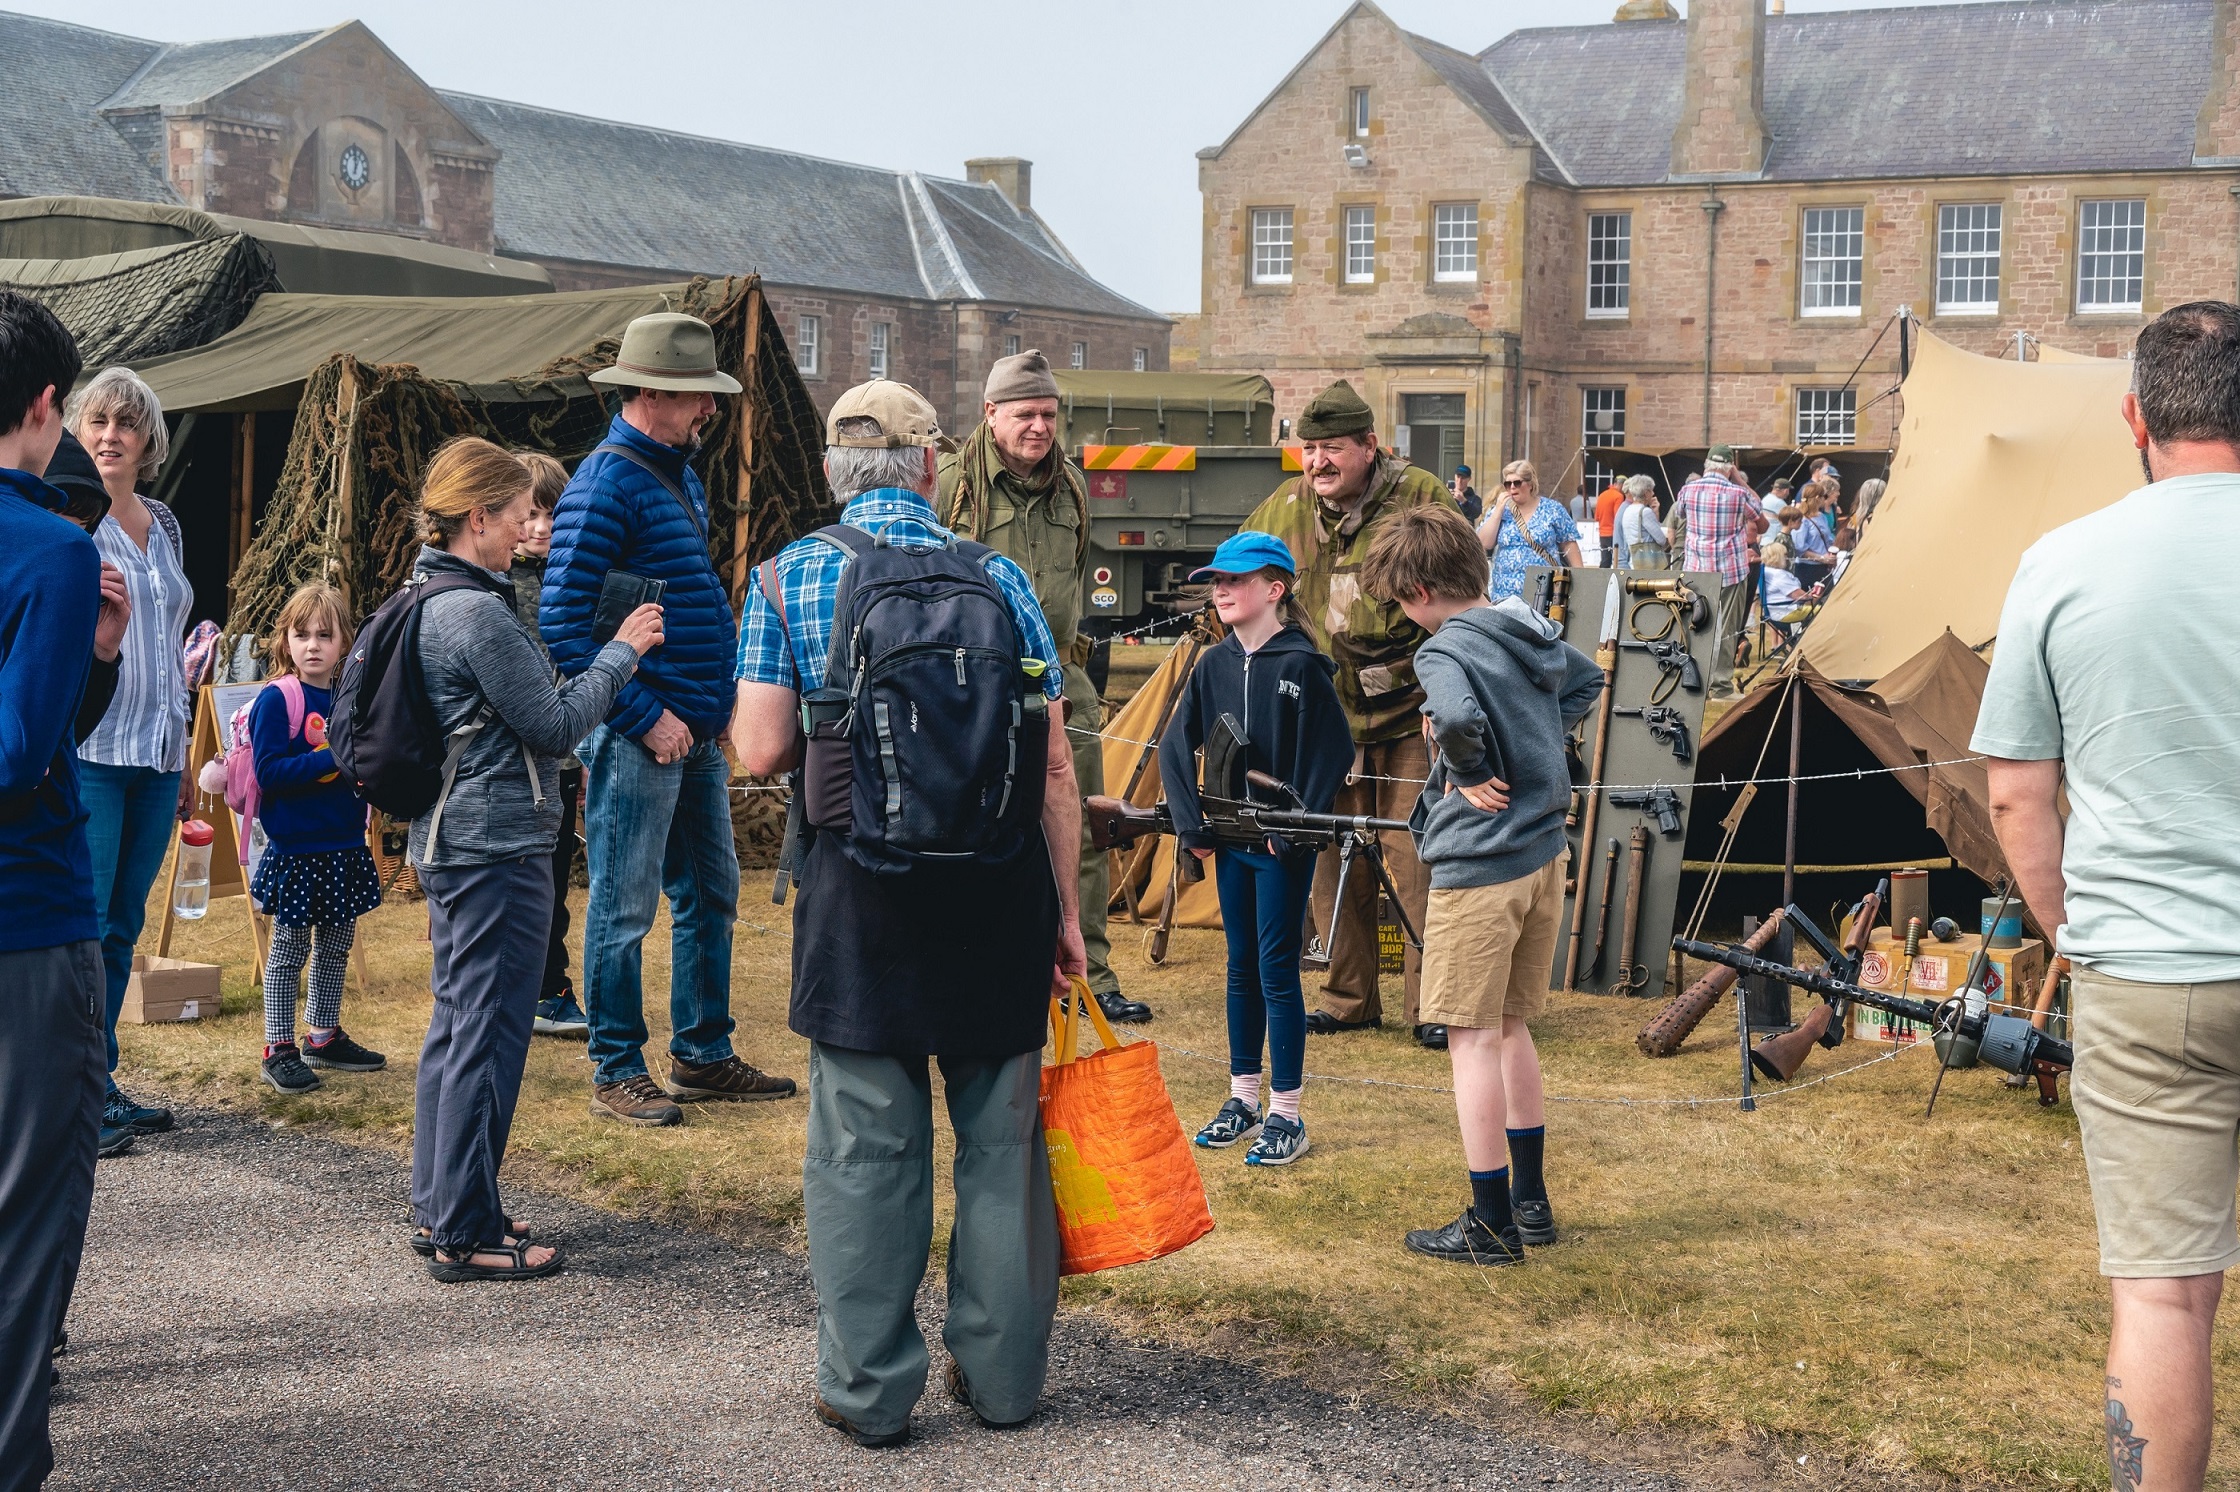 A group of people gathering in front of tents at the Celebration of the Centuries event at Fort George.